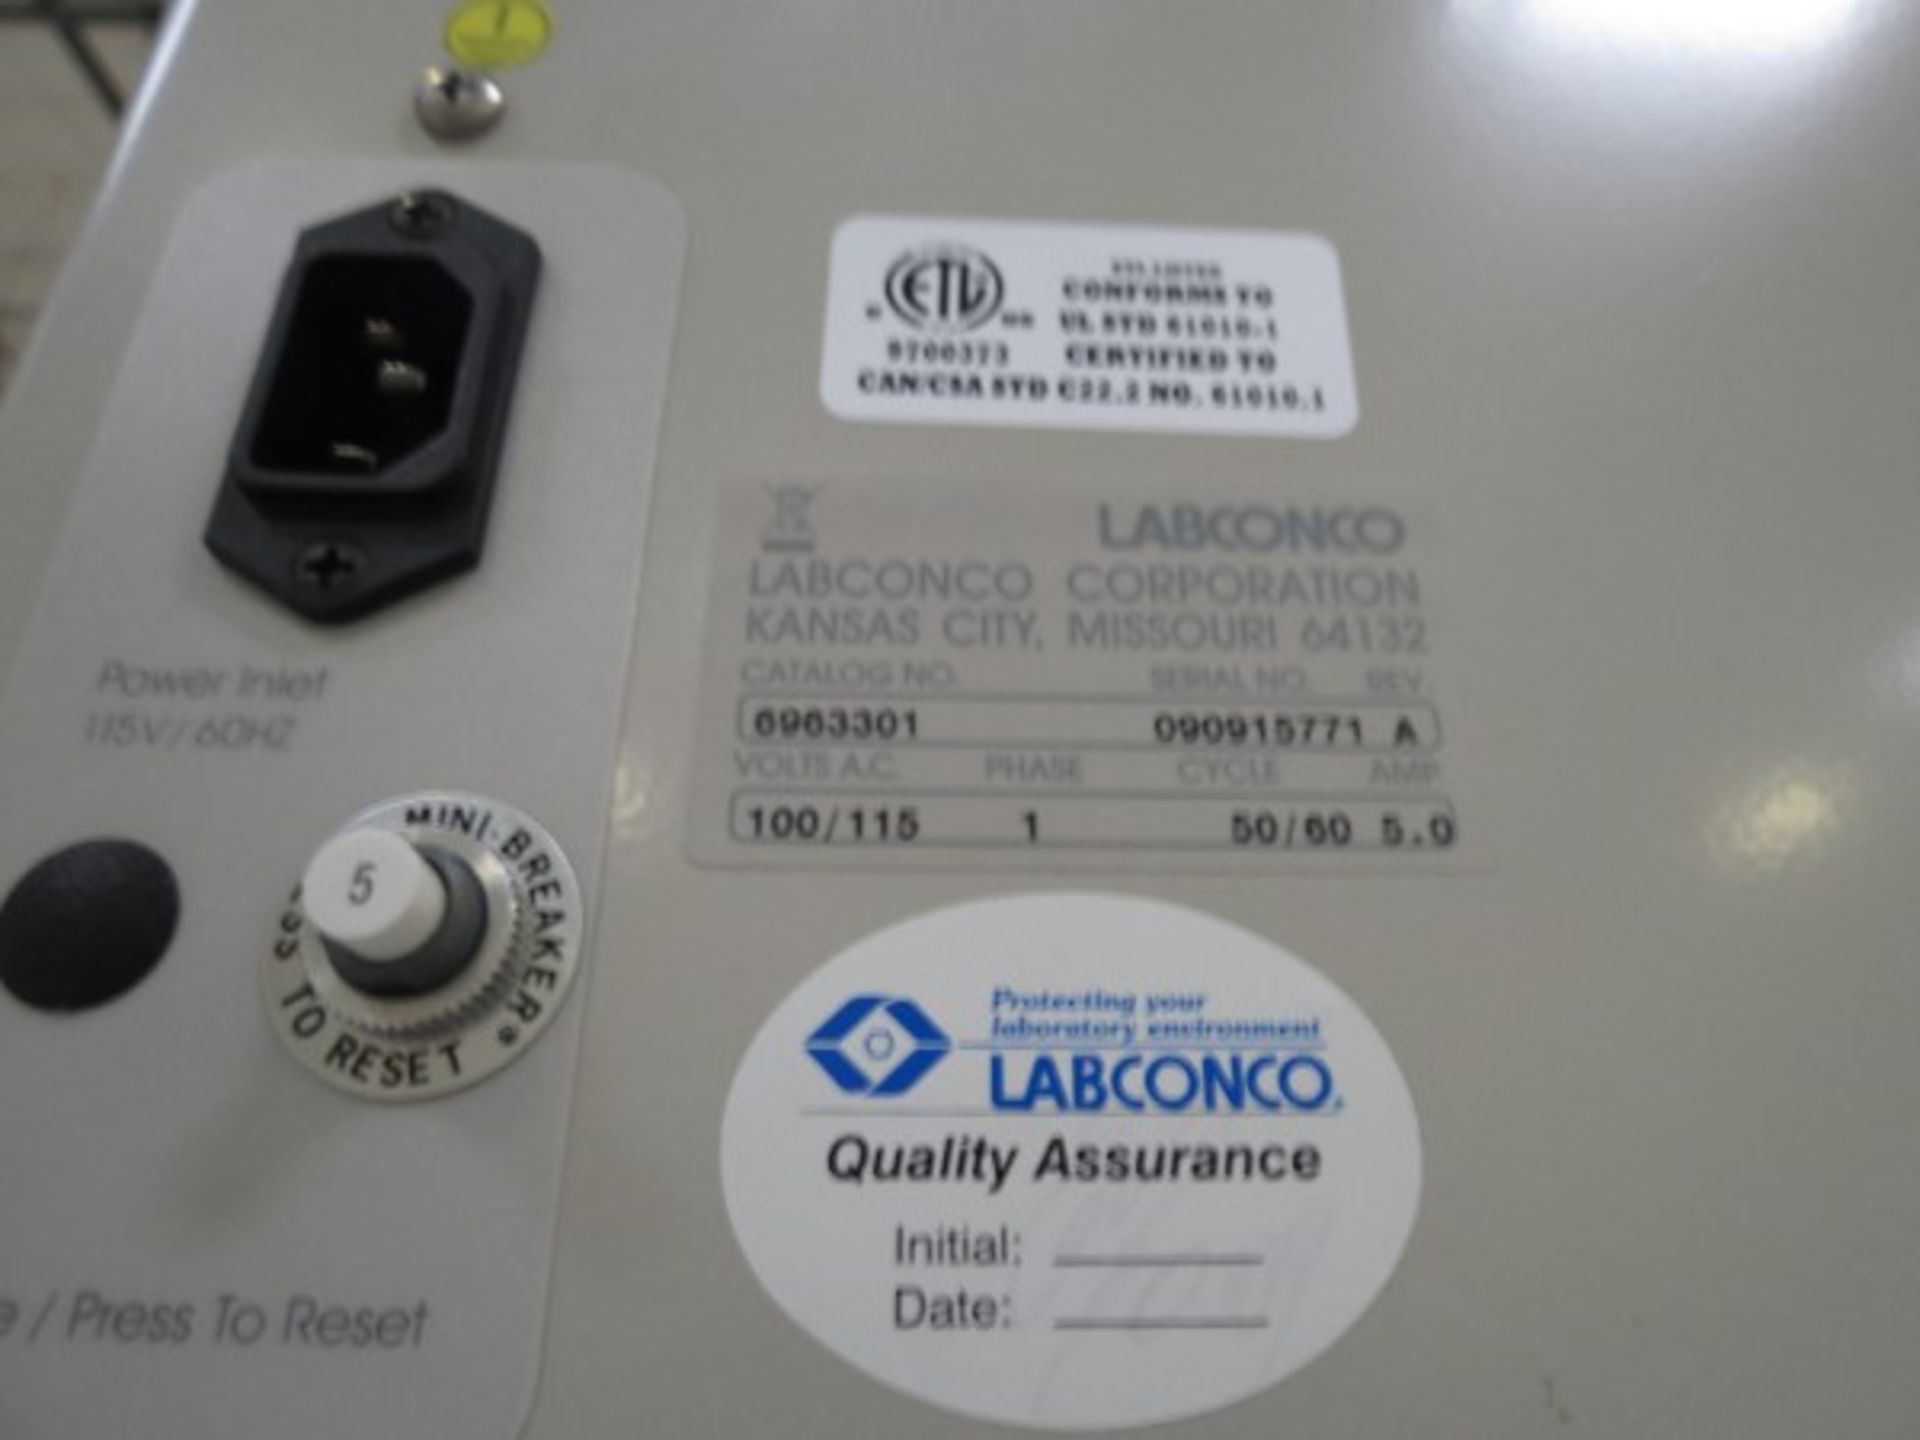 Labconco Paramont Ductless Enclosure Fume Hood, S/N 090915771A - Image 5 of 5